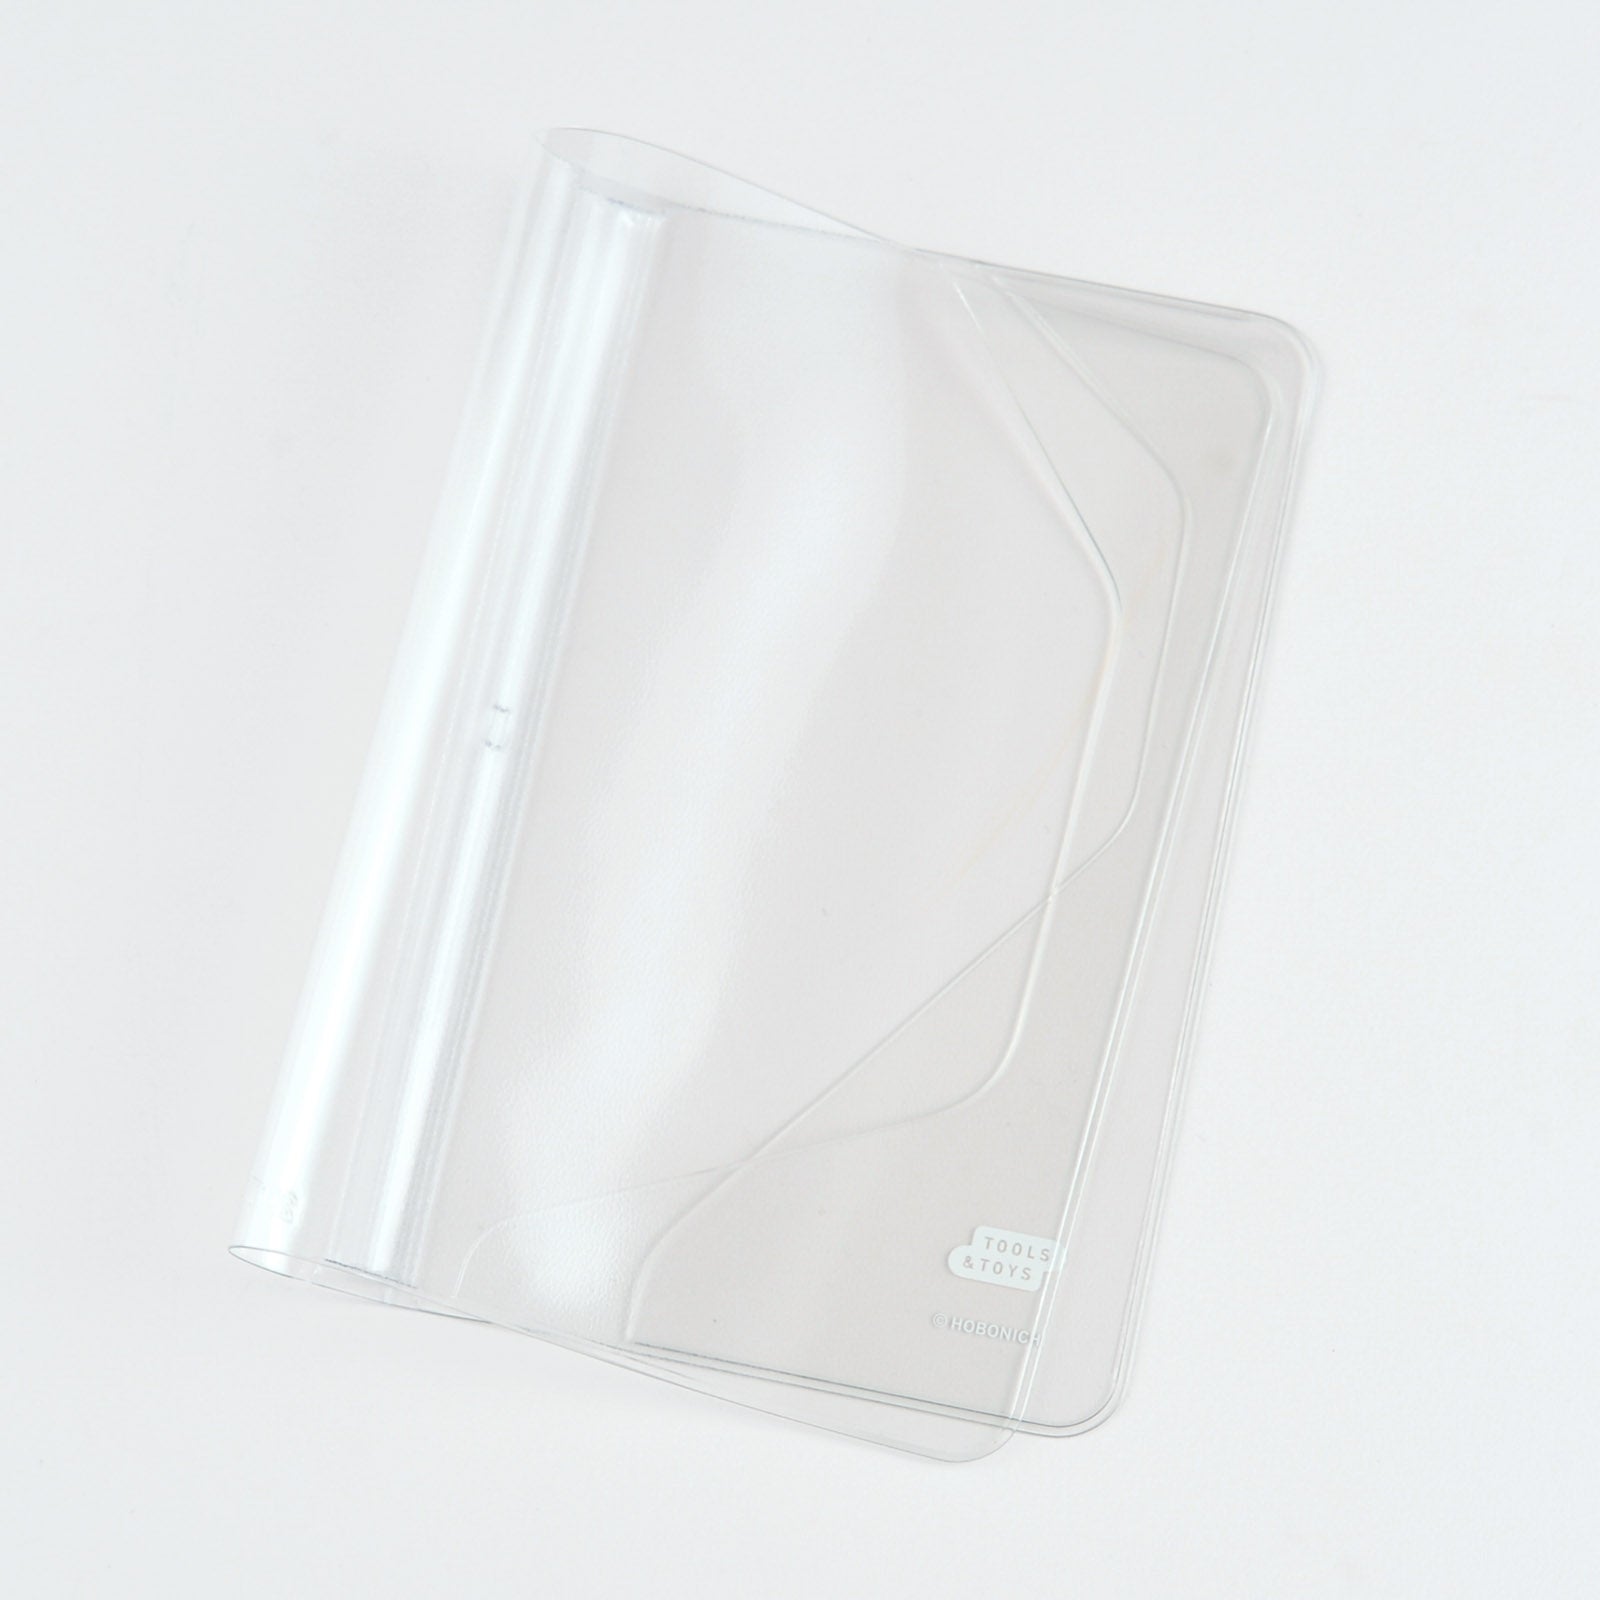 Hobonichi Clear Cover on Cover / A6 Planner Cover on cover is a protective cover that can be used on top of your Hobonichi cloth covers to protect them from wear and tear. This product can not be used on top of the book only. You can also store illustrations under your cover on cover to boost your Hobonichi covers design.